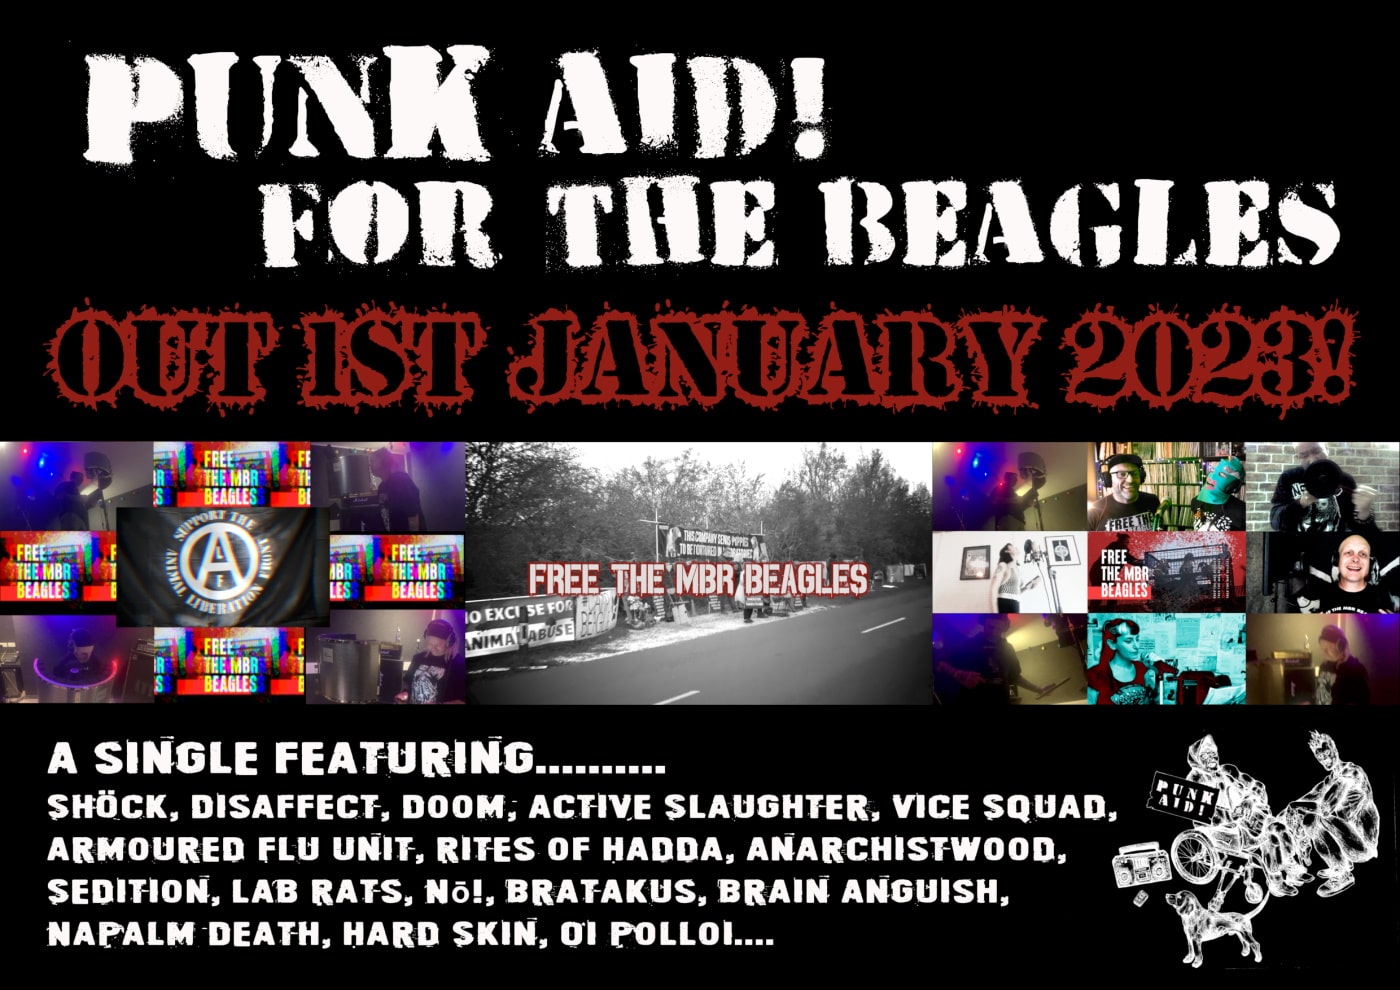 Punk Aid Solidarity with the Beagles 